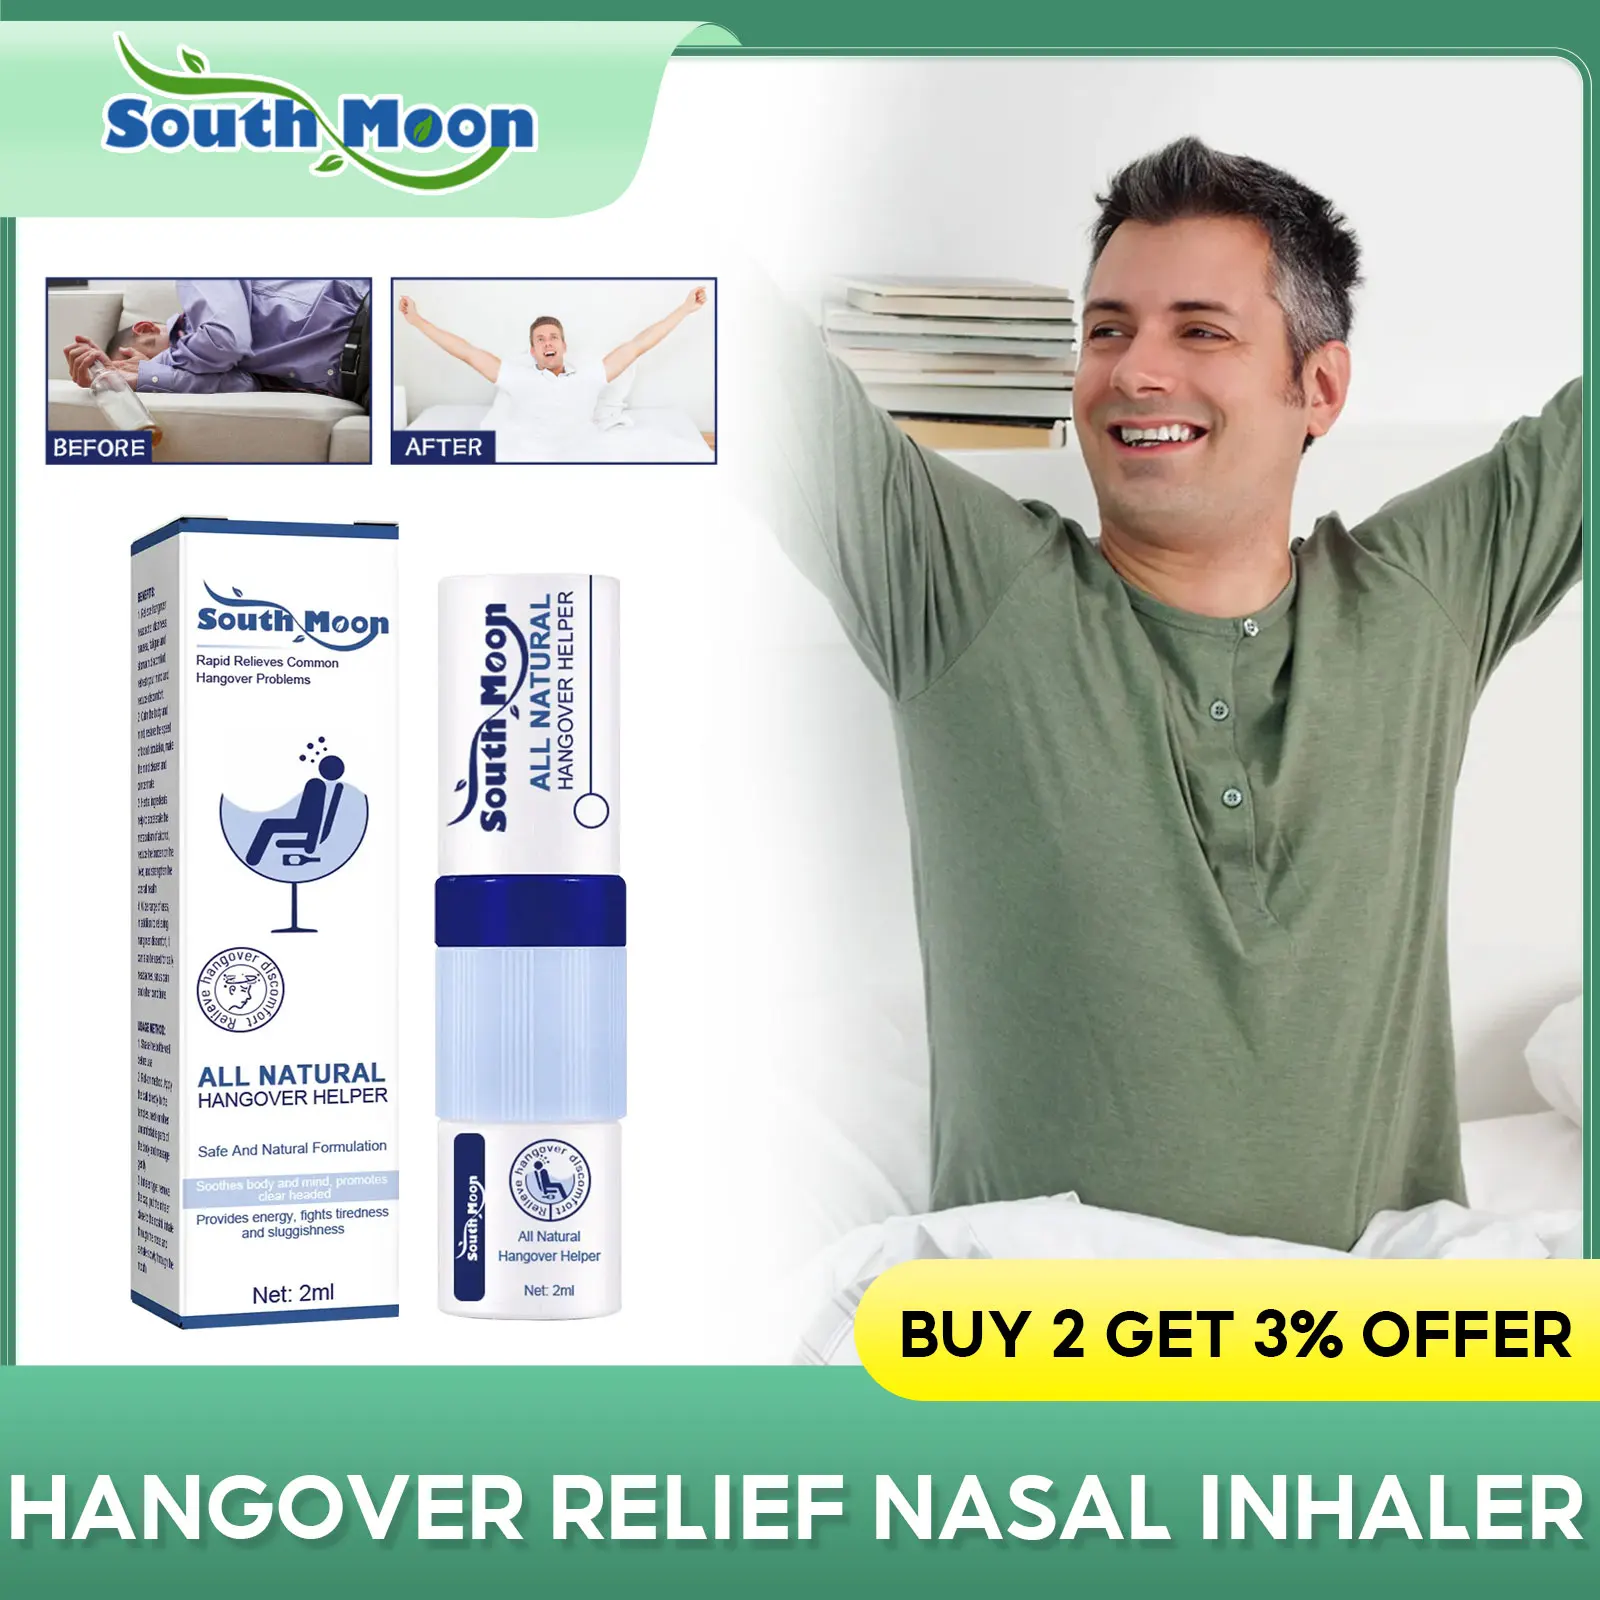 

Hangover Relief Nasal Inhaler Cure Drunk Headache Dizziness Hangover Recover Dispel Alcohol Refreshing Protect Liver Health Care